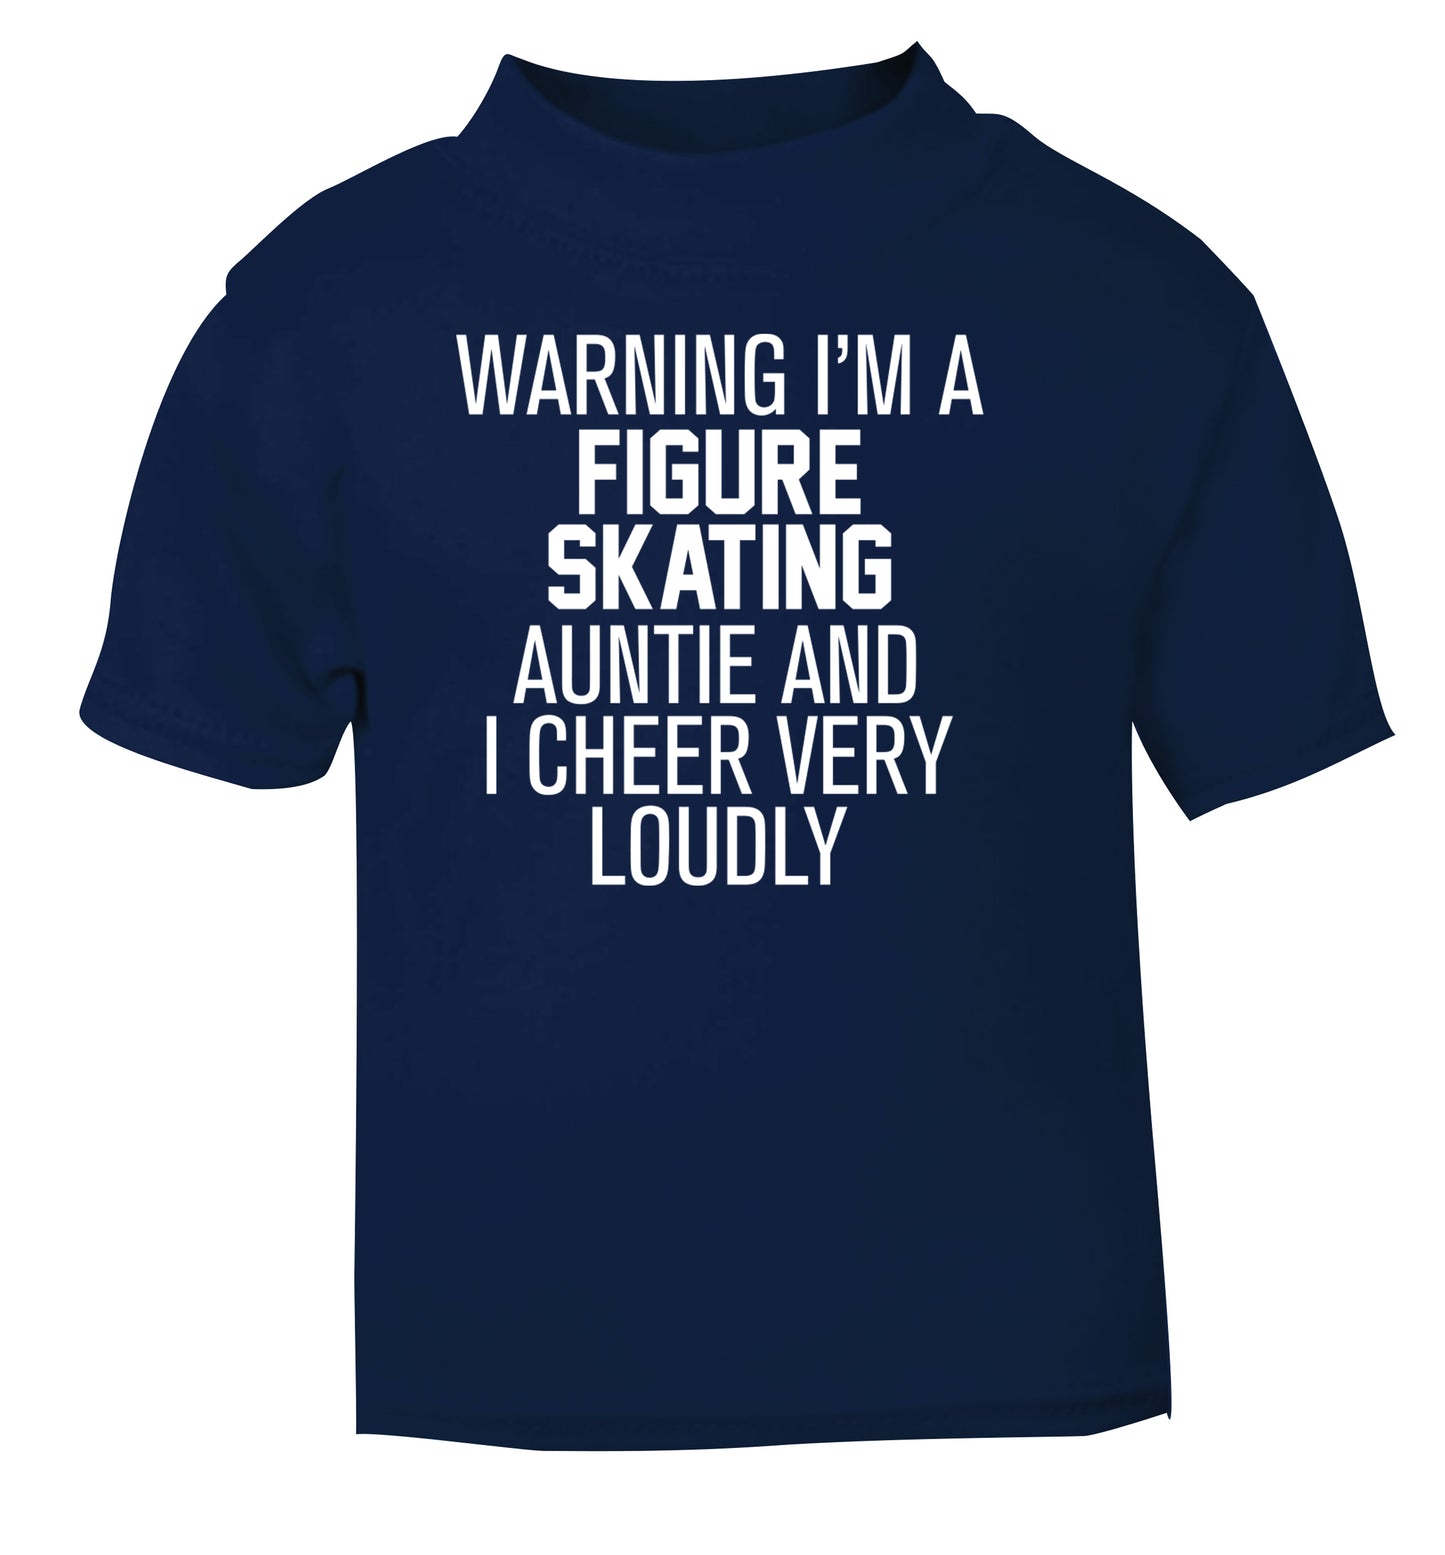 Warning I'm a figure skating auntie and I cheer very loudly navy Baby Toddler Tshirt 2 Years